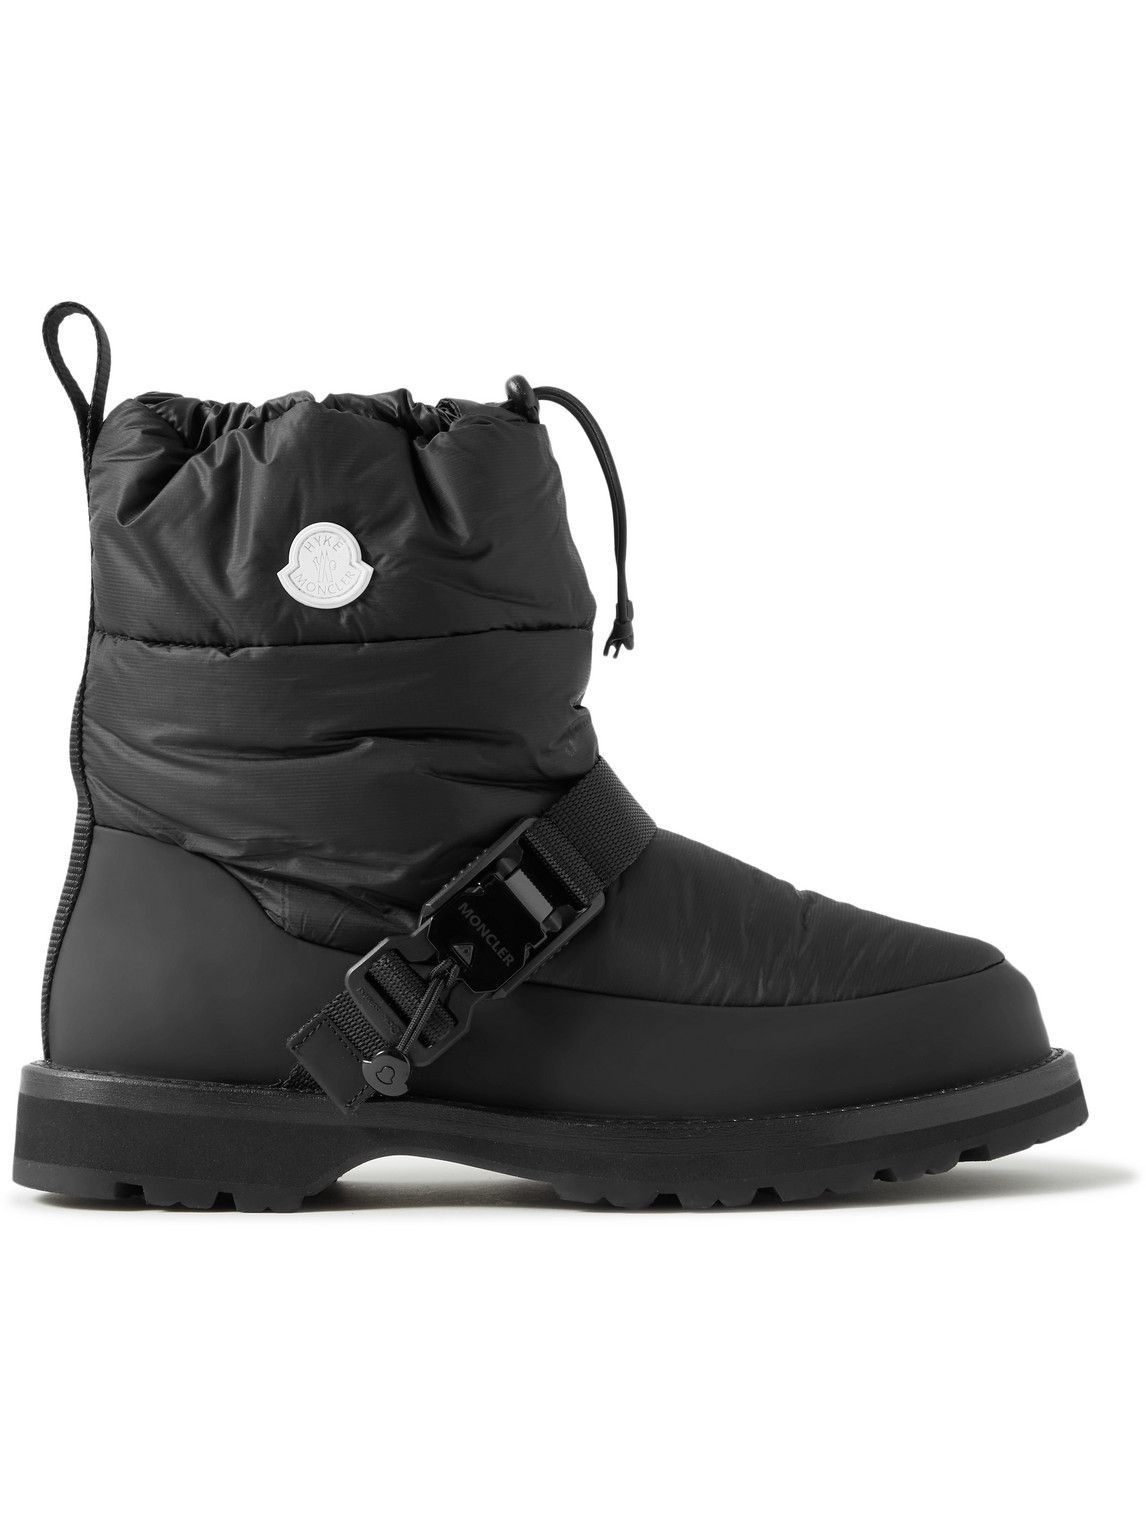 Moncler Genius - HYKE Rubber-Trimmed Quilted Shell Snow Boots - Black ...